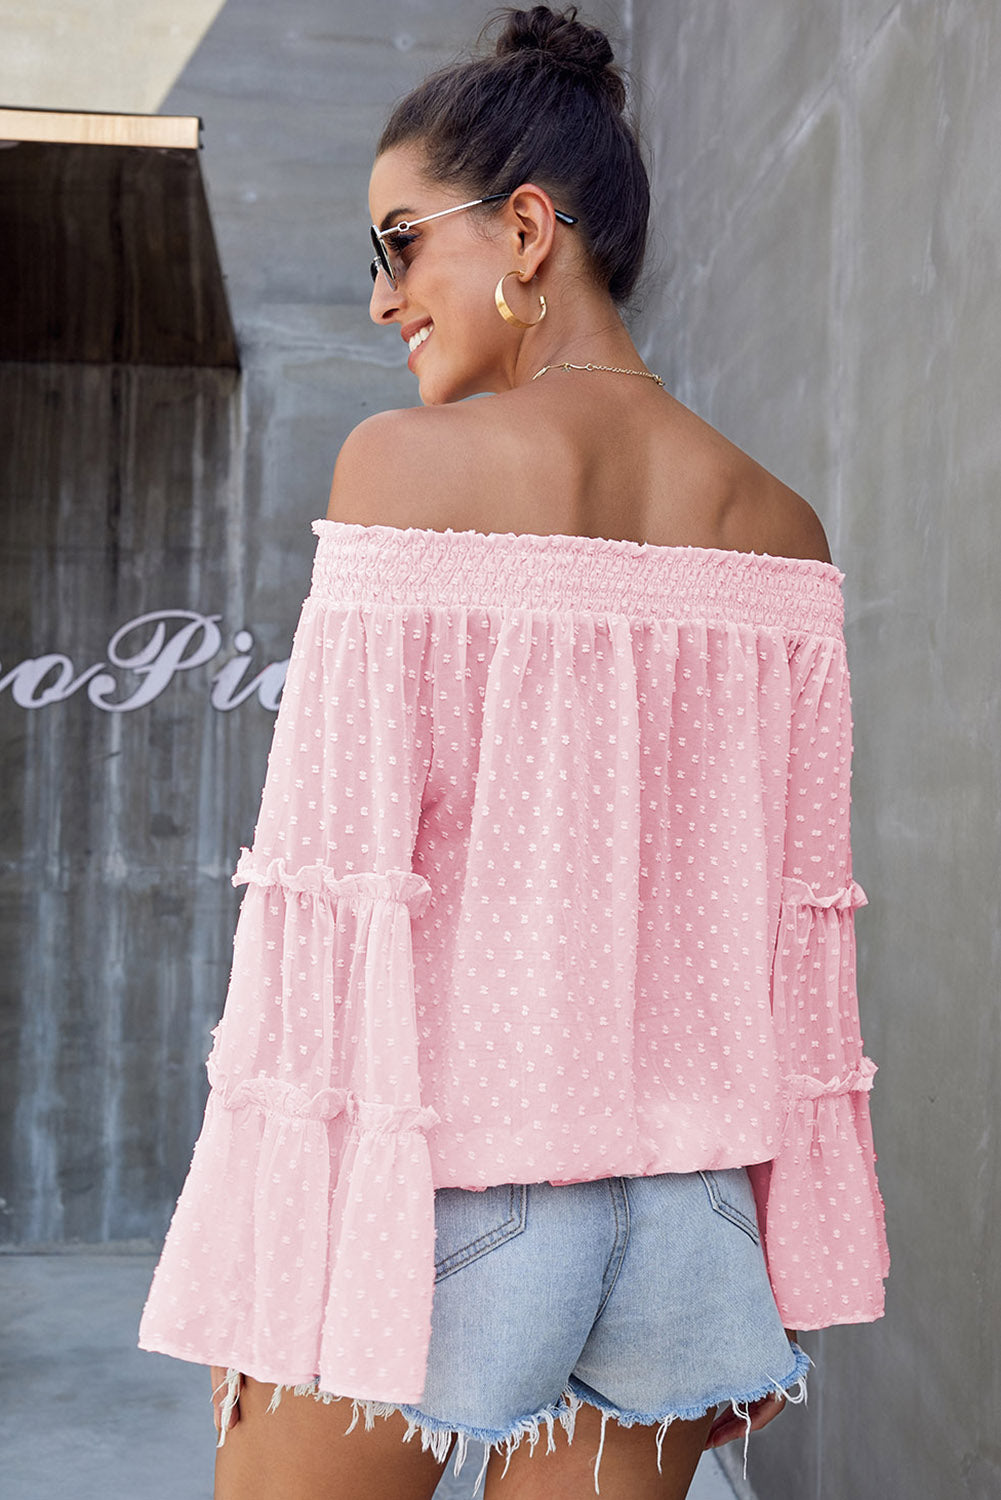 Blouse Chic a Pois Suisse Rose Manches Flare Epaule Denudee